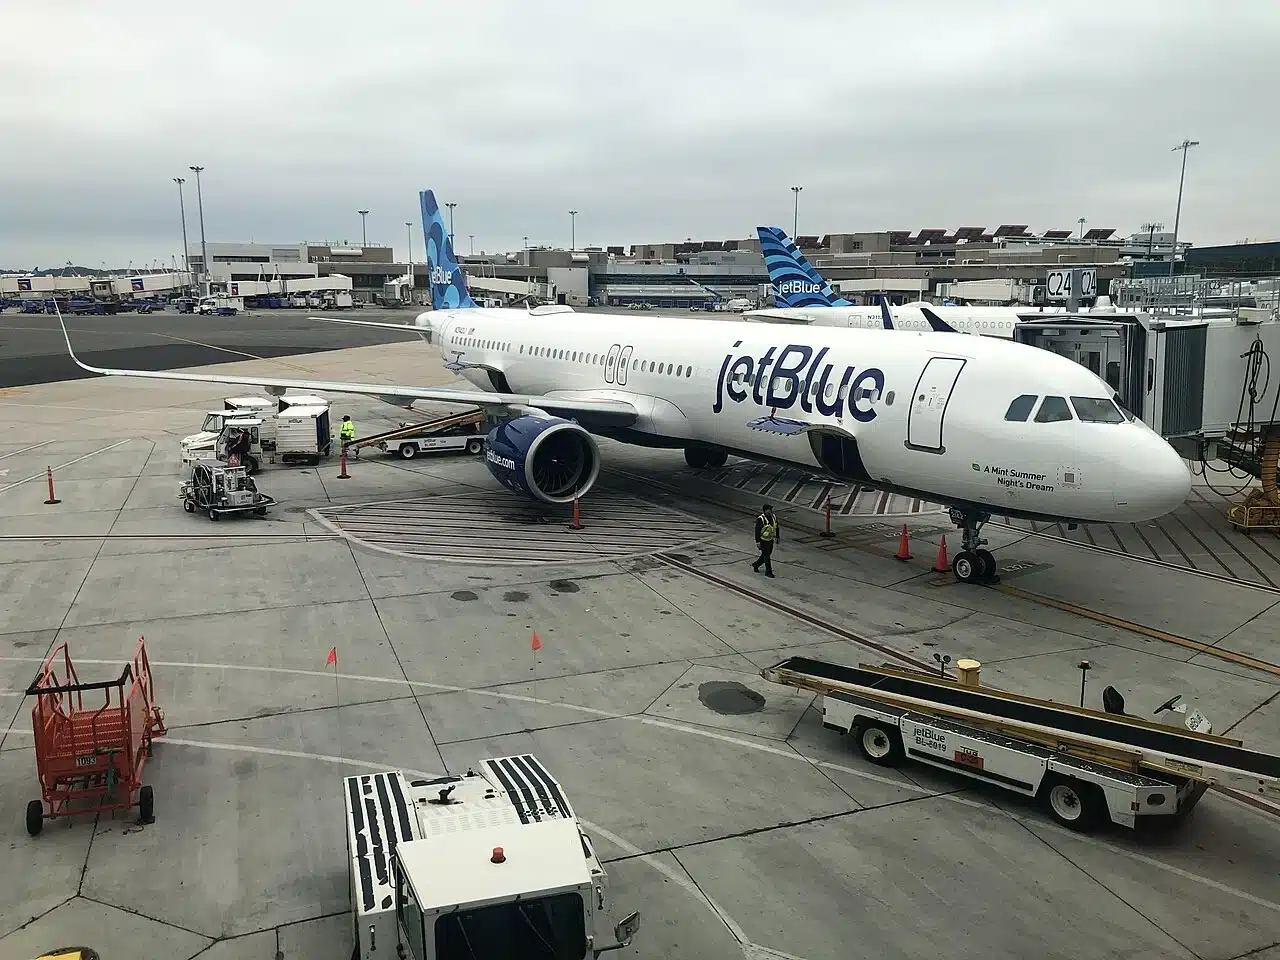 JetBlue Airways Airbus A321 at the gate. JetBlue uses the LR version of this aircraft on flights to Europe.